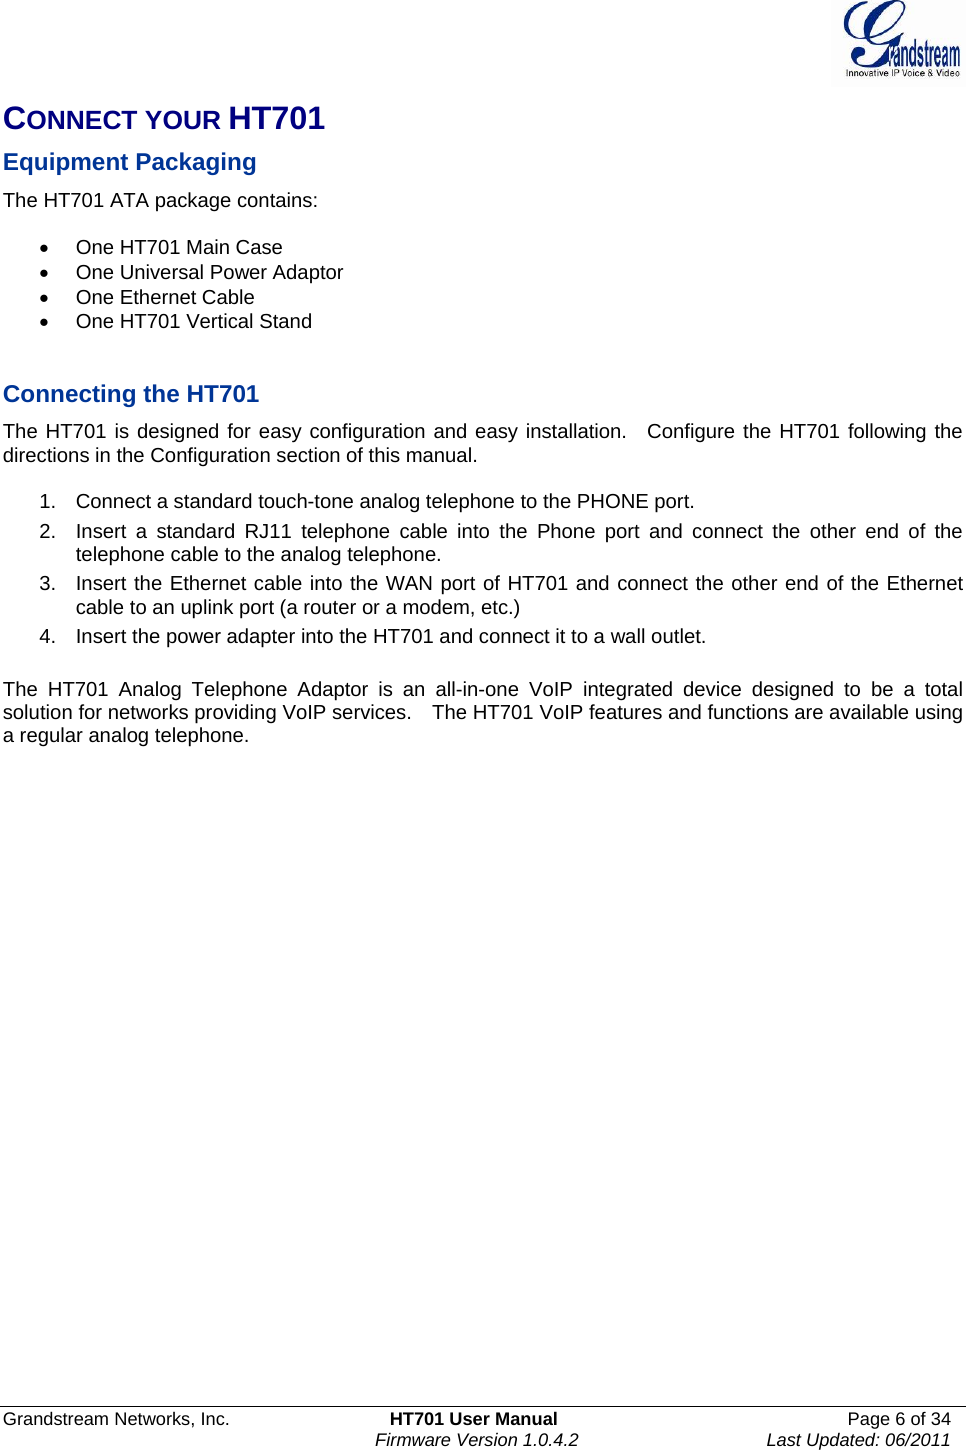  Grandstream Networks, Inc.  HT701 User Manual  Page 6 of 34     Firmware Version 1.0.4.2  Last Updated: 06/2011  CONNECT YOUR HT701  Equipment Packaging The HT701 ATA package contains:  •  One HT701 Main Case •  One Universal Power Adaptor •  One Ethernet Cable •  One HT701 Vertical Stand   Connecting the HT701 The HT701 is designed for easy configuration and easy installation.  Configure the HT701 following the directions in the Configuration section of this manual.    1.  Connect a standard touch-tone analog telephone to the PHONE port. 2.  Insert a standard RJ11 telephone cable into the Phone port and connect the other end of the telephone cable to the analog telephone. 3.  Insert the Ethernet cable into the WAN port of HT701 and connect the other end of the Ethernet cable to an uplink port (a router or a modem, etc.) 4.  Insert the power adapter into the HT701 and connect it to a wall outlet.   The HT701 Analog Telephone Adaptor is an all-in-one VoIP integrated device designed to be a total solution for networks providing VoIP services.    The HT701 VoIP features and functions are available using a regular analog telephone.    